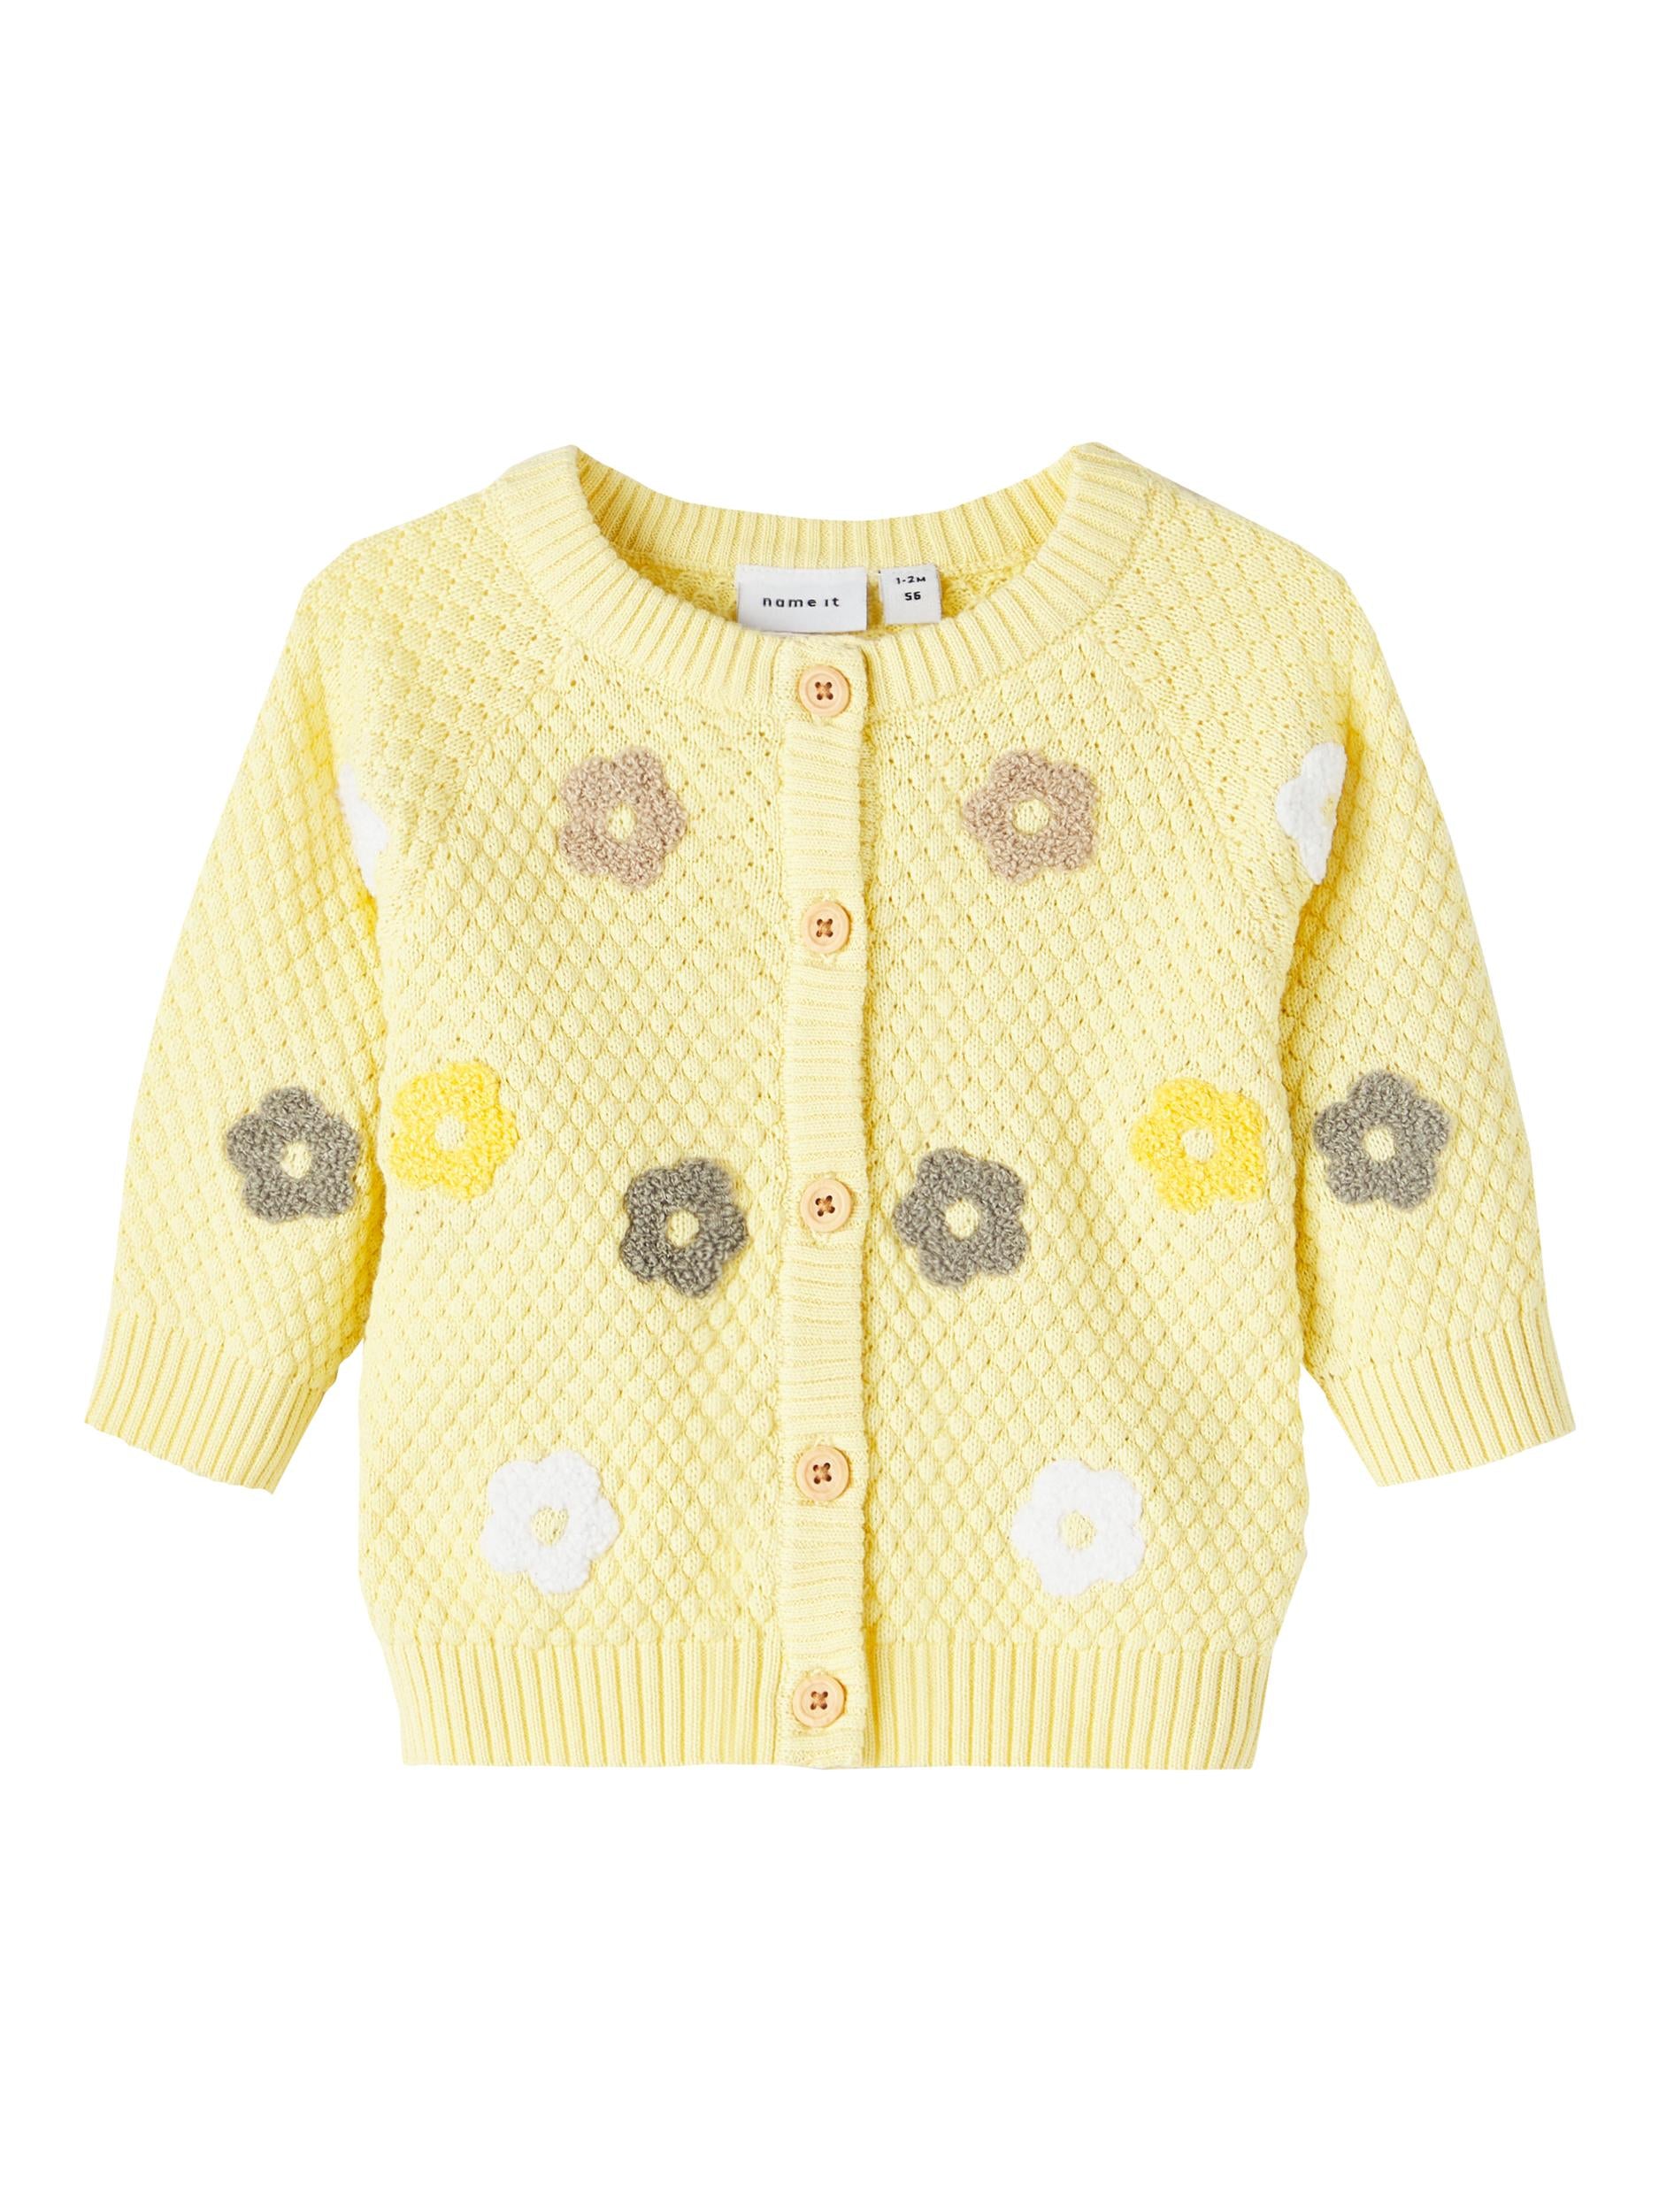 Girl's Pineapple Slice Feninna Long Sleeve Knit Cardigan-Front View